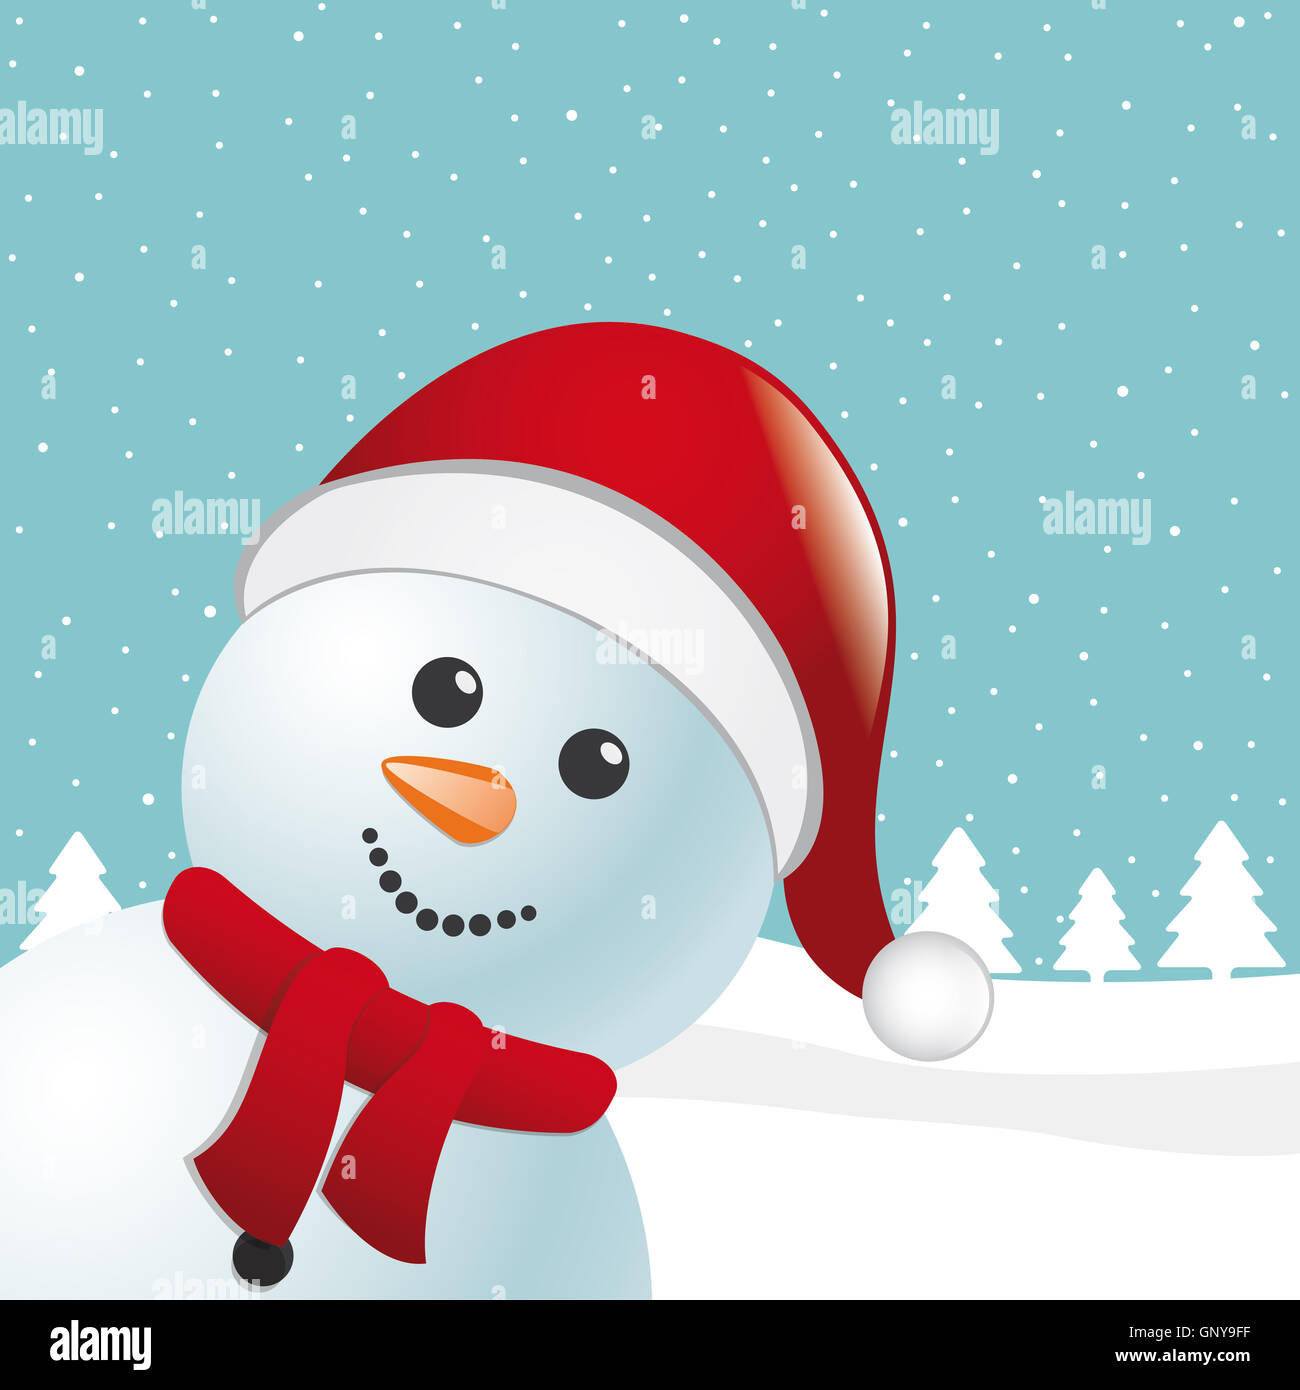 snowman scarf and santa claus hat Stock Photo